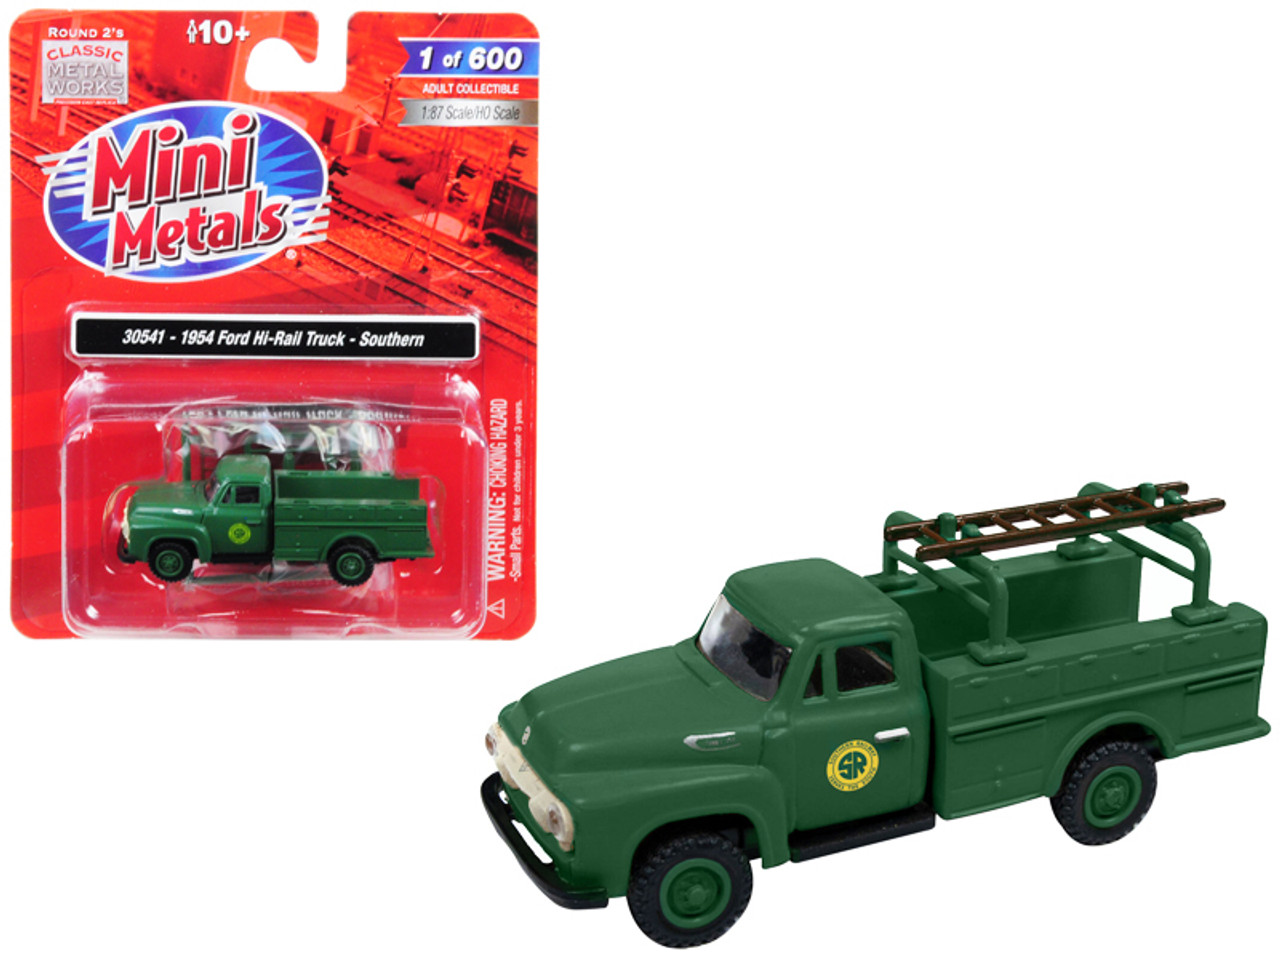 1954 Ford Hi-Rail Truck "Southern" Green with Accessories 1/87 (HO) Scale Model by Classic Metal Works